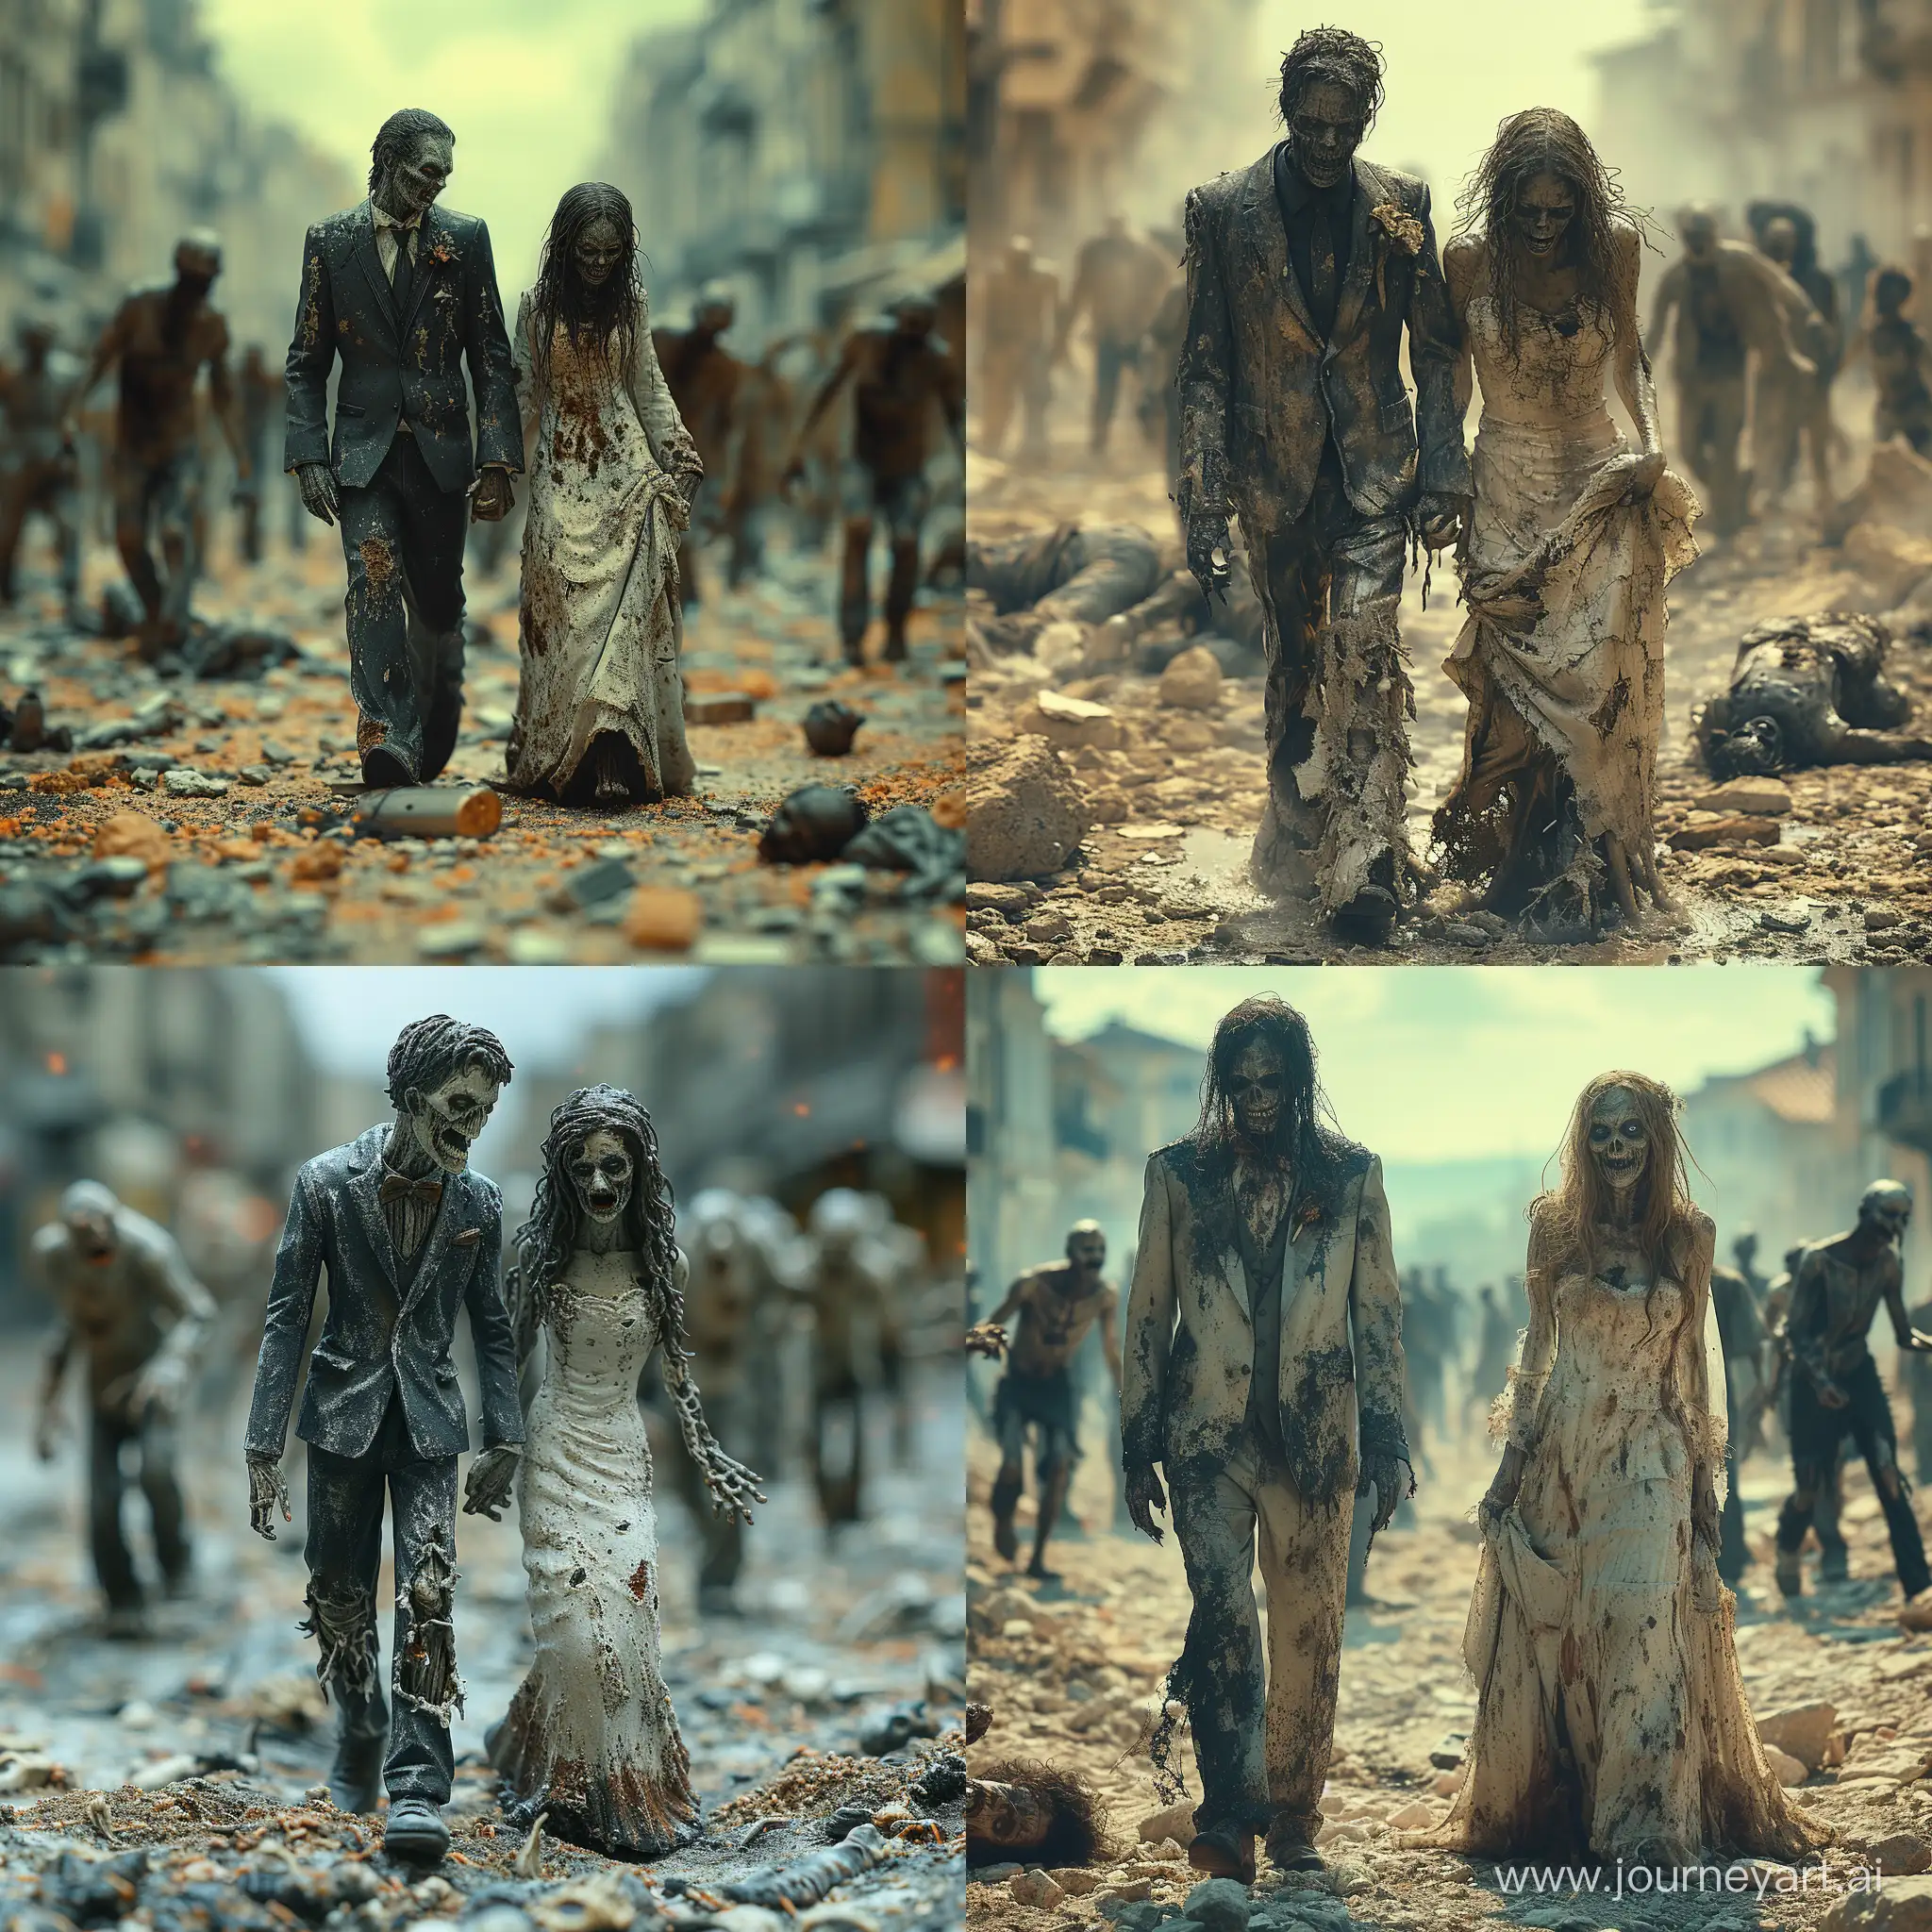 Zombie-Wedding-Scene-Undead-Bride-and-Groom-Amidst-Chaotic-Old-Town